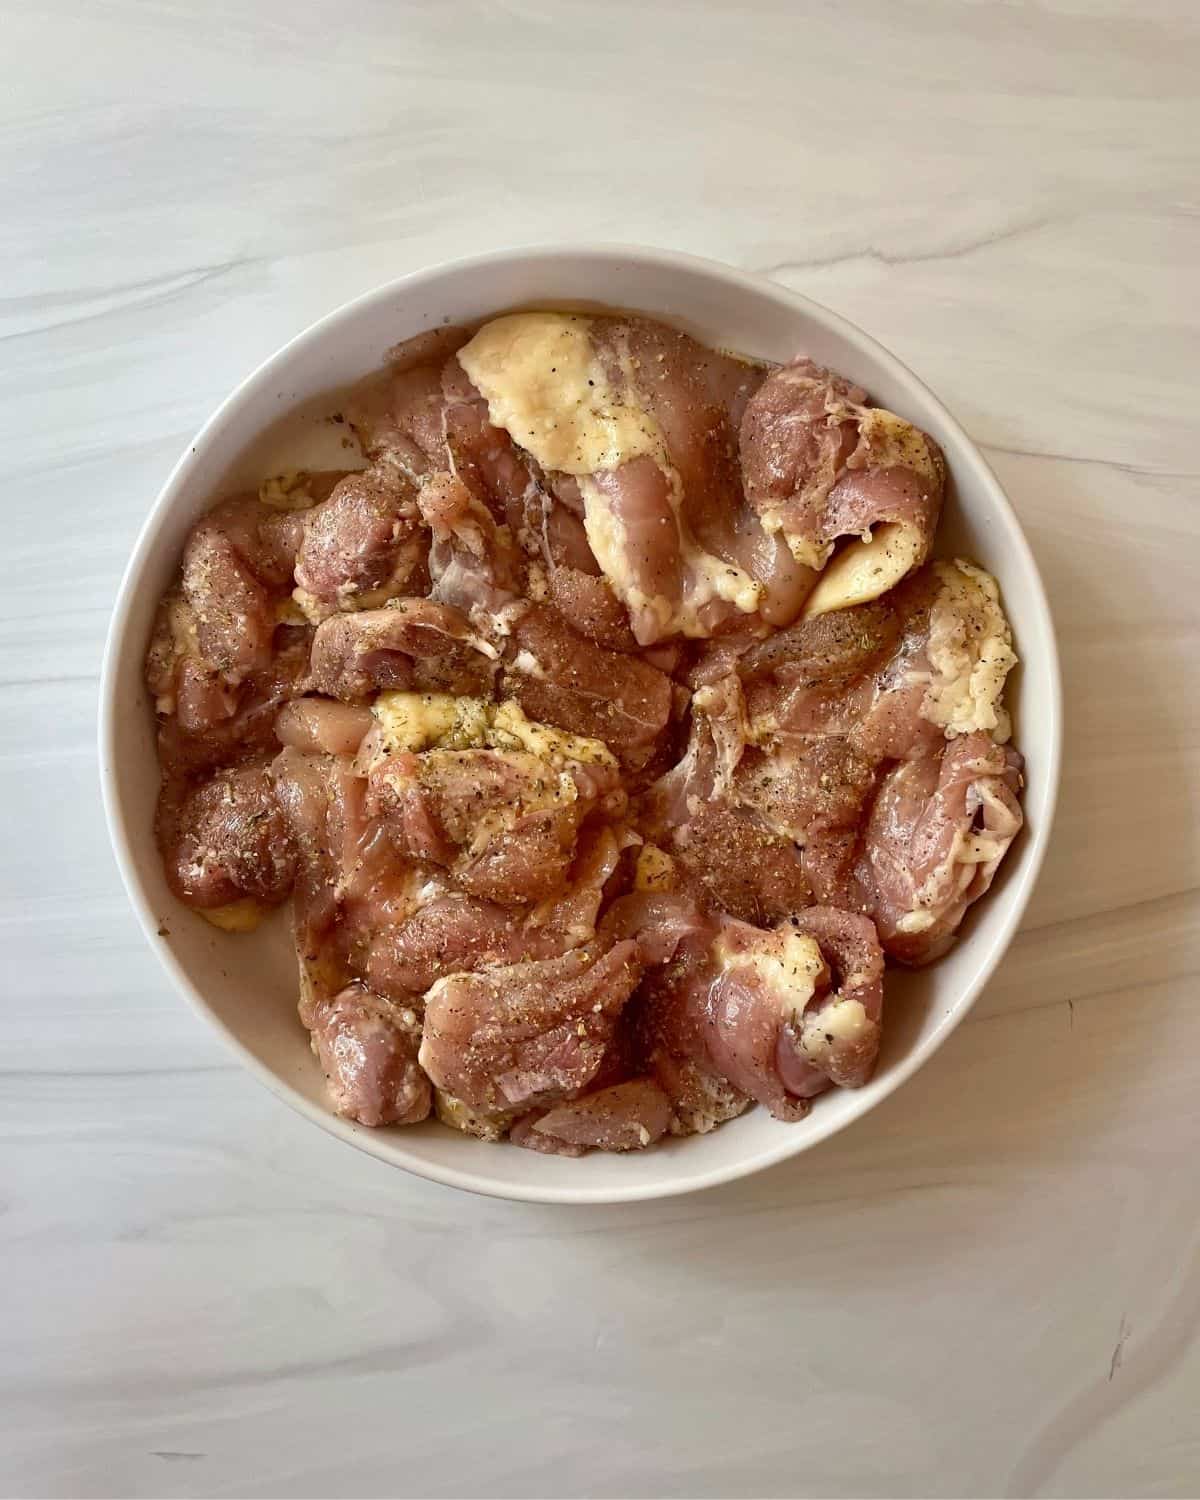 Raw boneless skinless chicken thighs with seasoning and olive oil in a round white bowl.